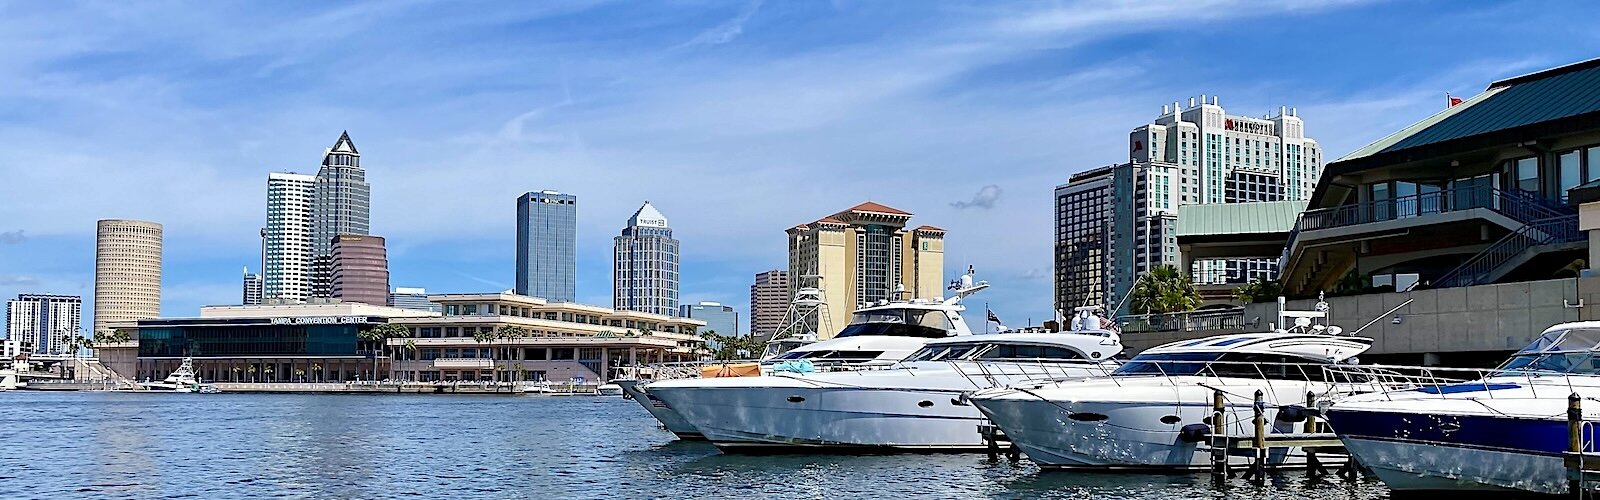 Private yachts dock next to Harbour Island across from the Tampa Convention Center on the water route into downtown Tampa.